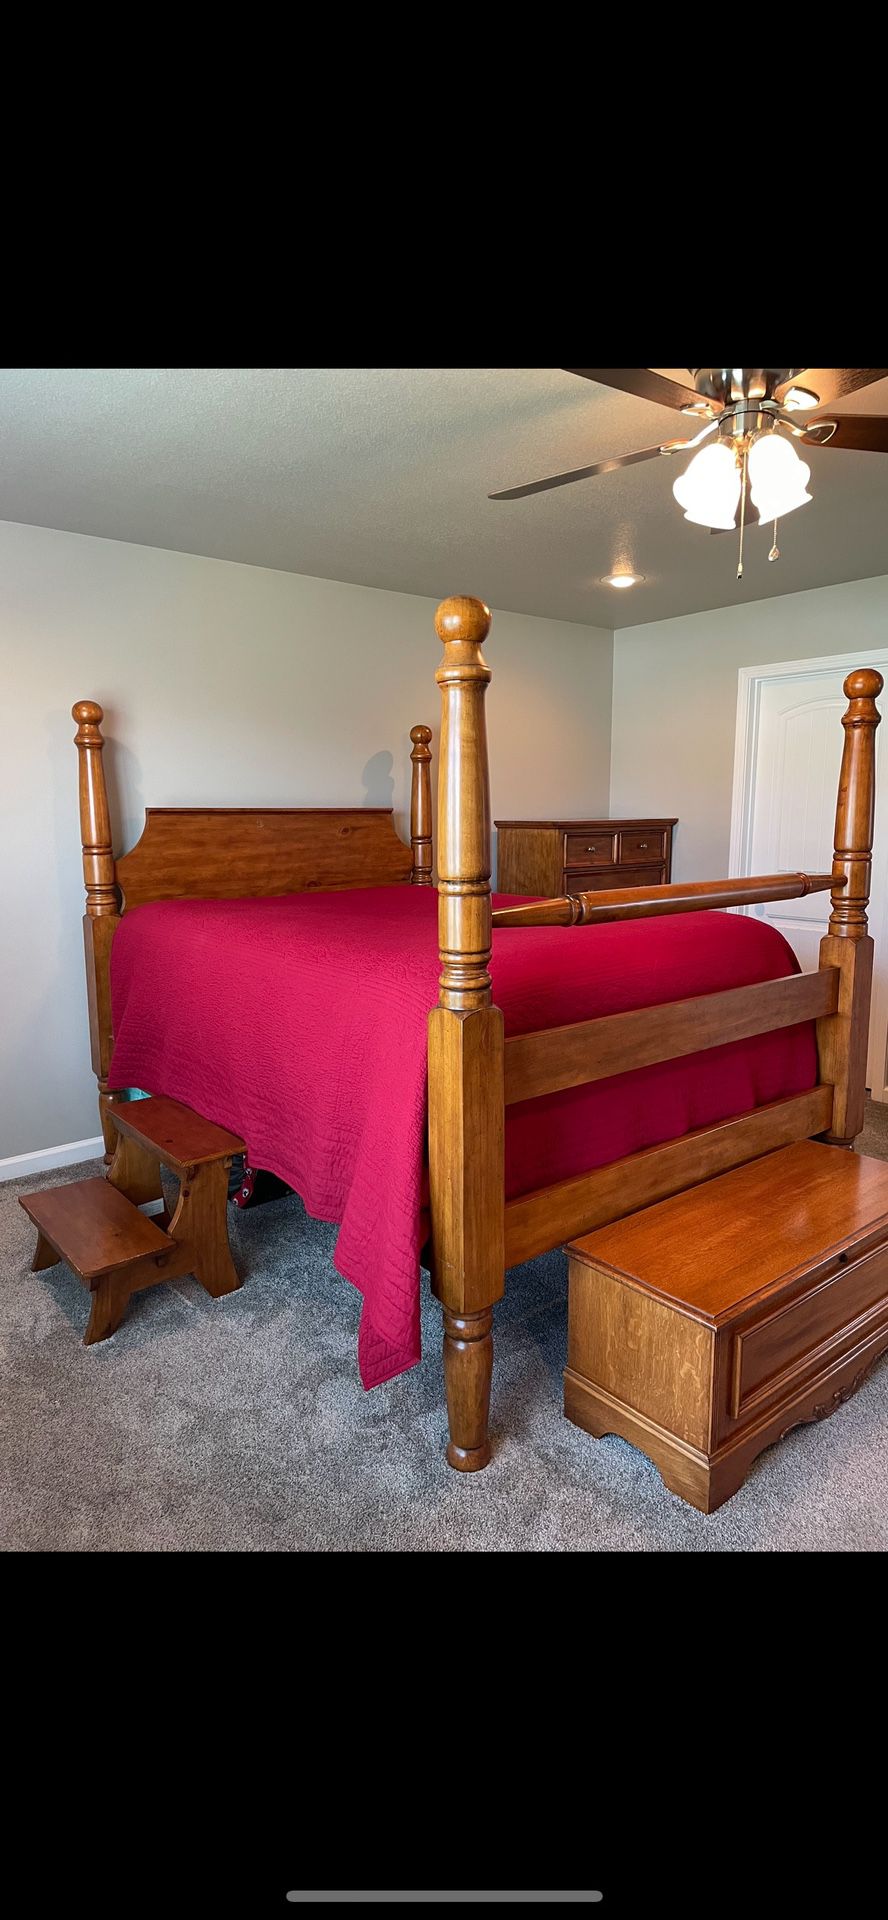 Queen Bed frame with Stairs, Chest Of Drawers, and Dresser with Mirror